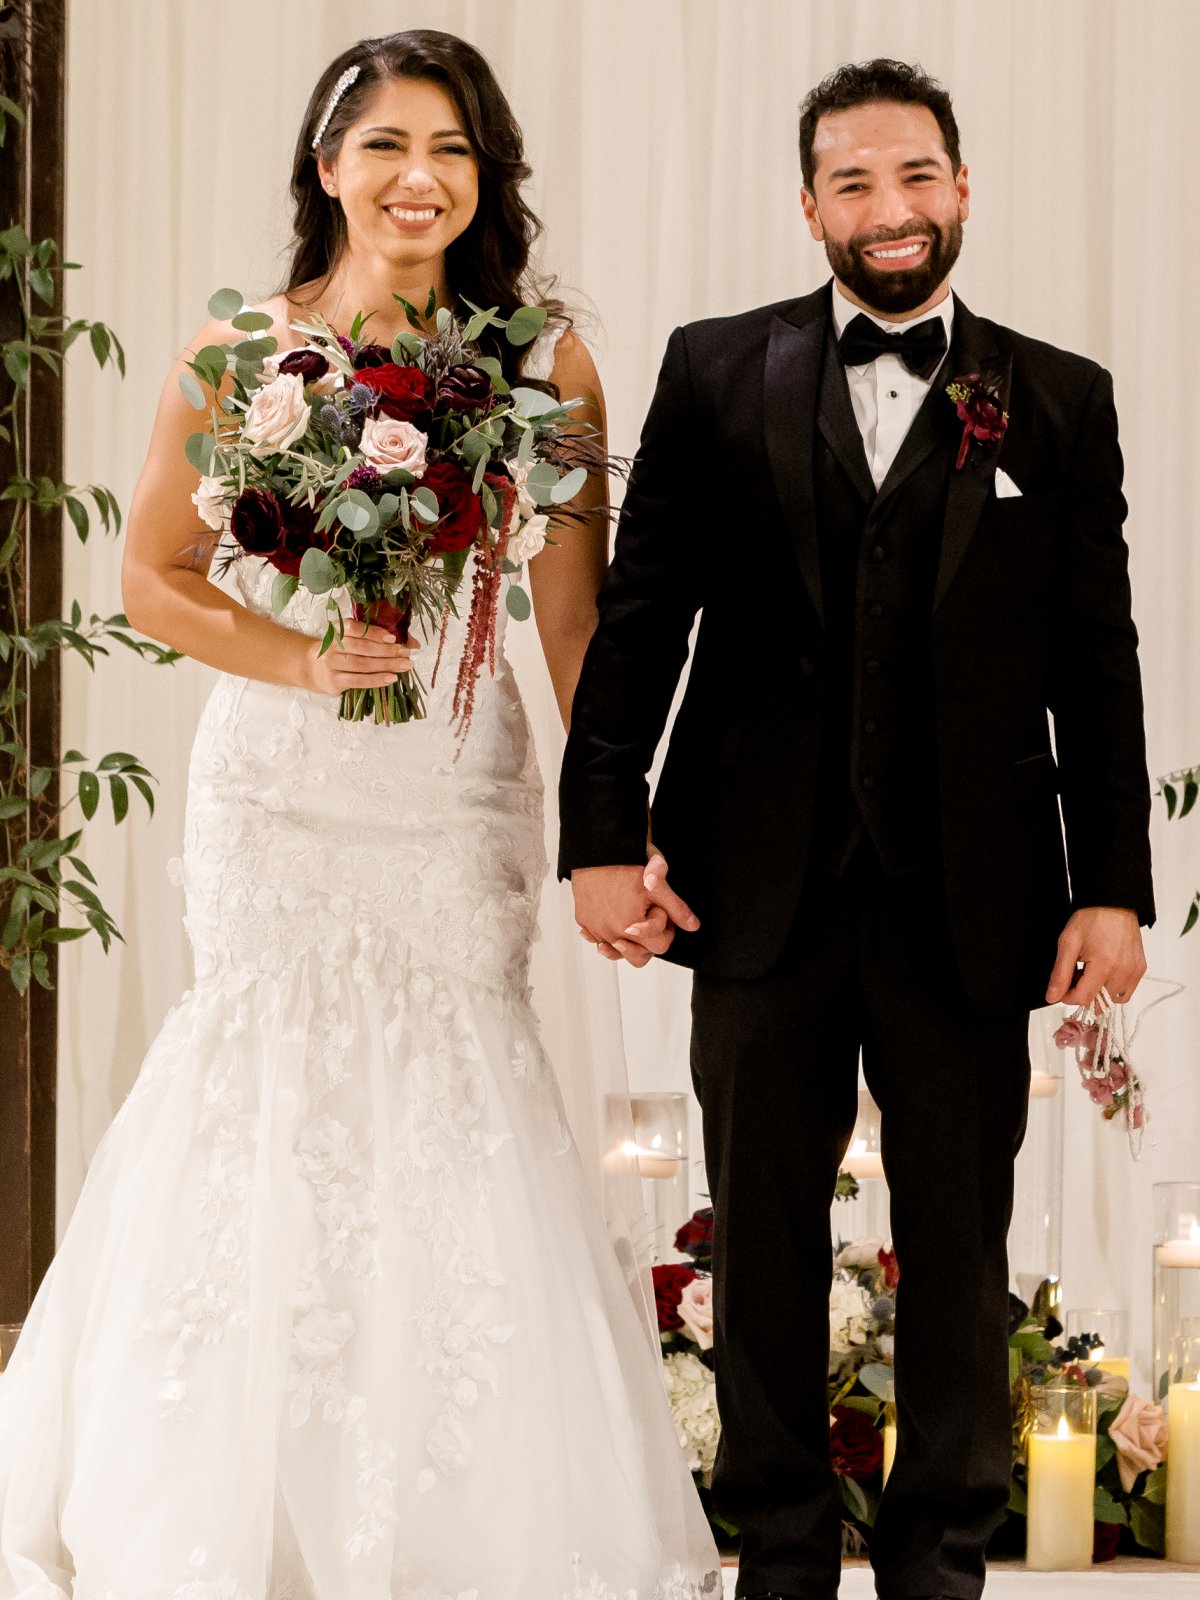 'Married at First Sight' Season 13 Couples: Meet the couples and learn